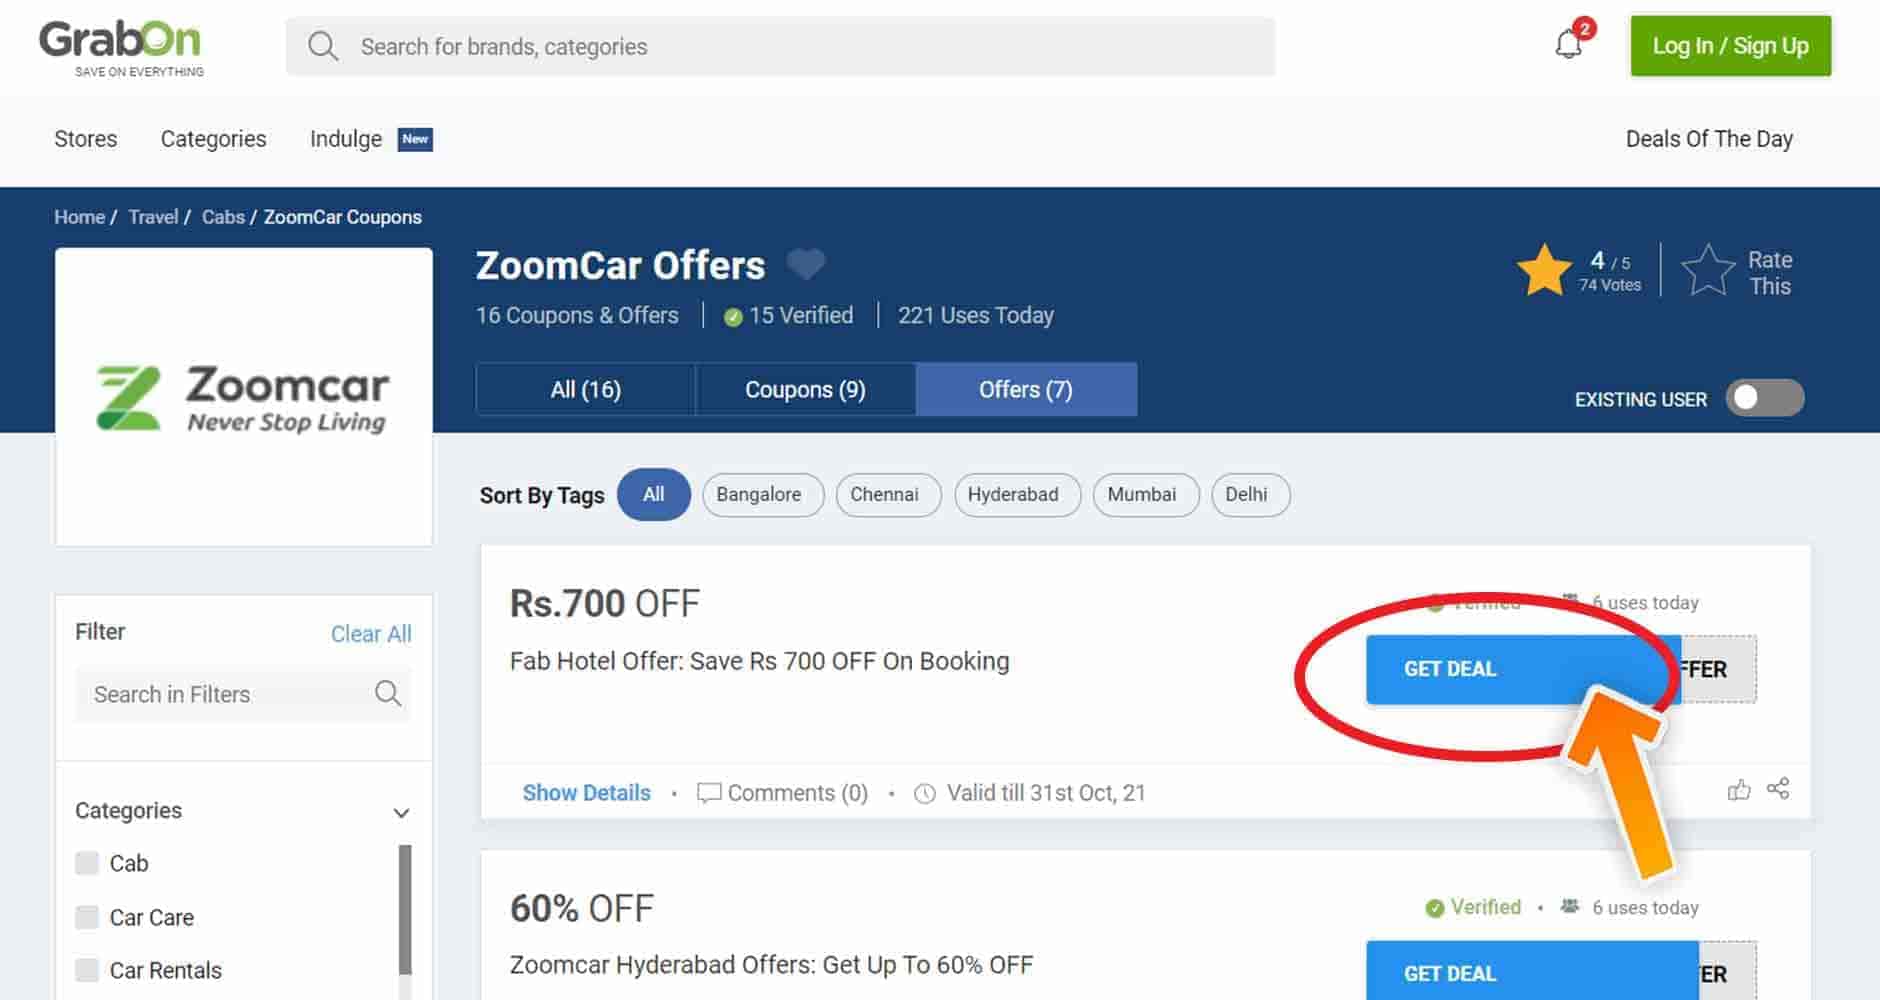 Zoomcar Offers